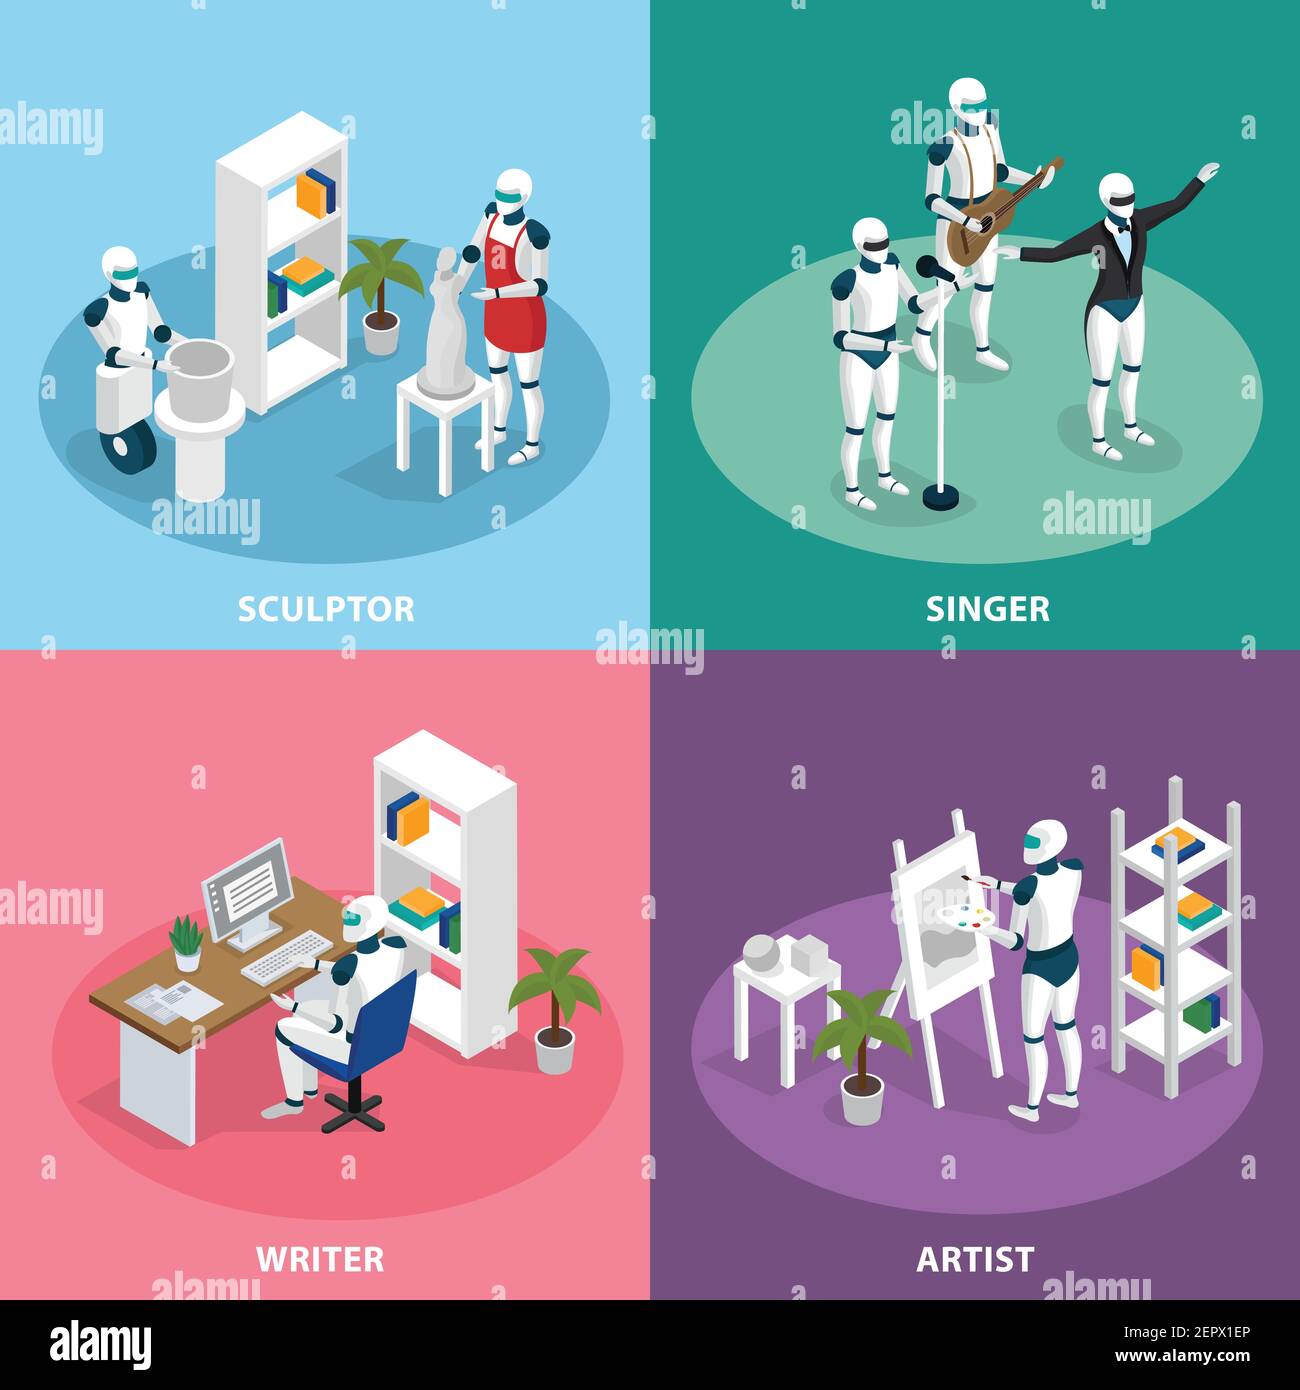 Artificial intelligence 4 isometric icons concept with creative robots sculptor artist writer singer musician isolated vector illustration Stock Vector